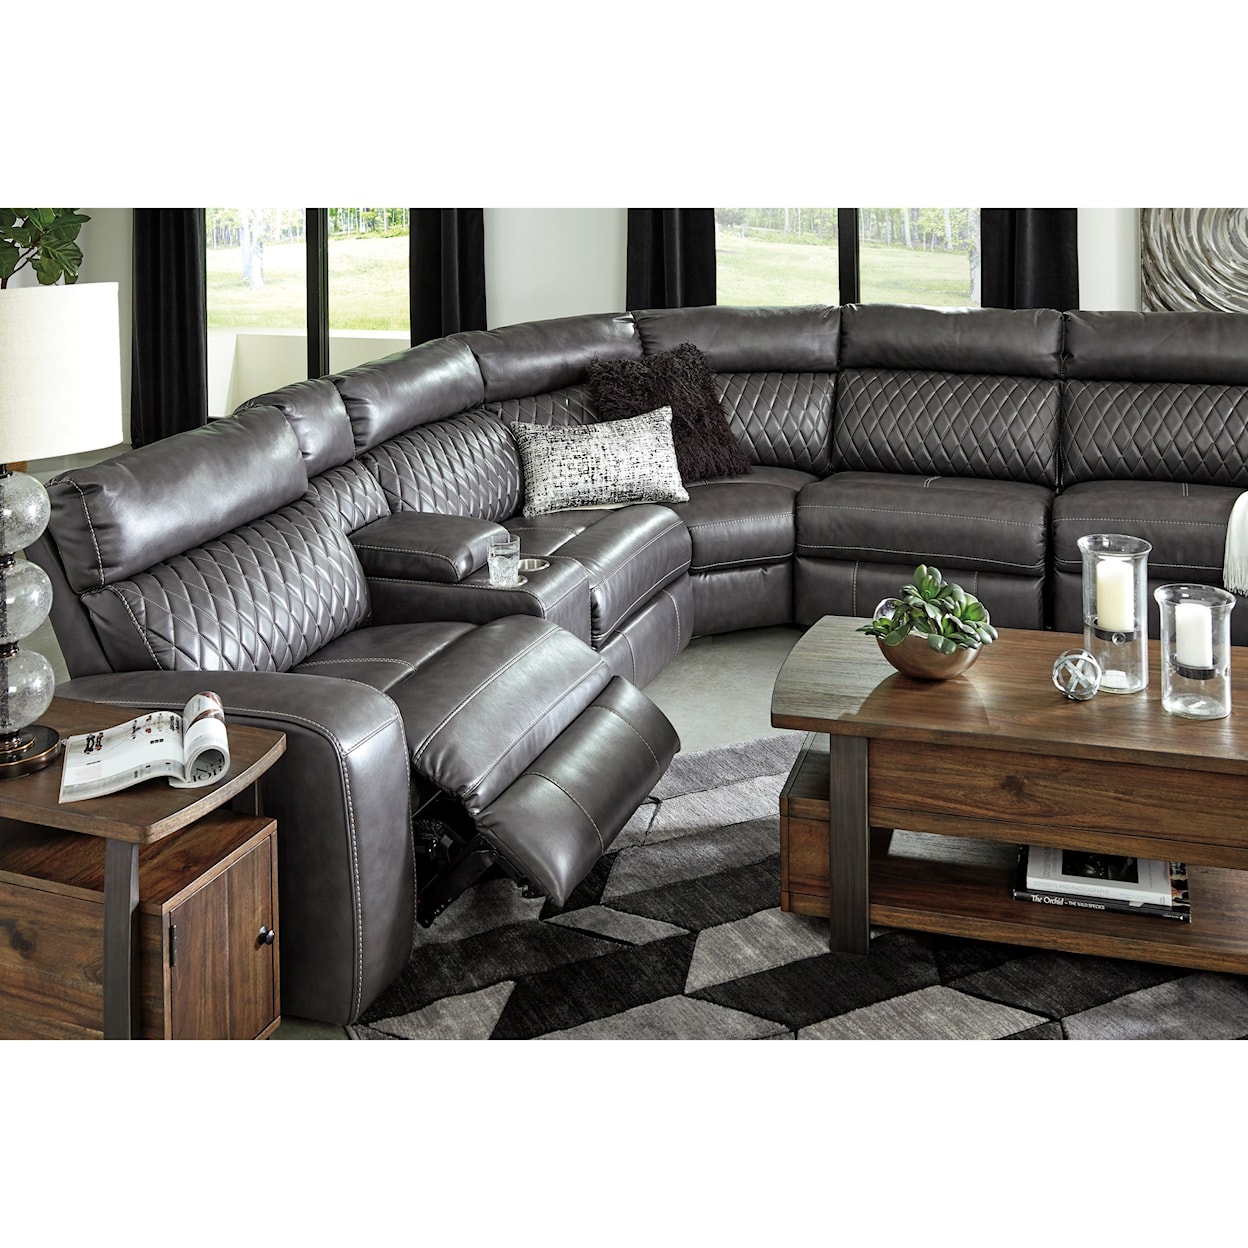 Signature Design by Ashley Furniture Samperstone Power Reclining Sectional Sofa